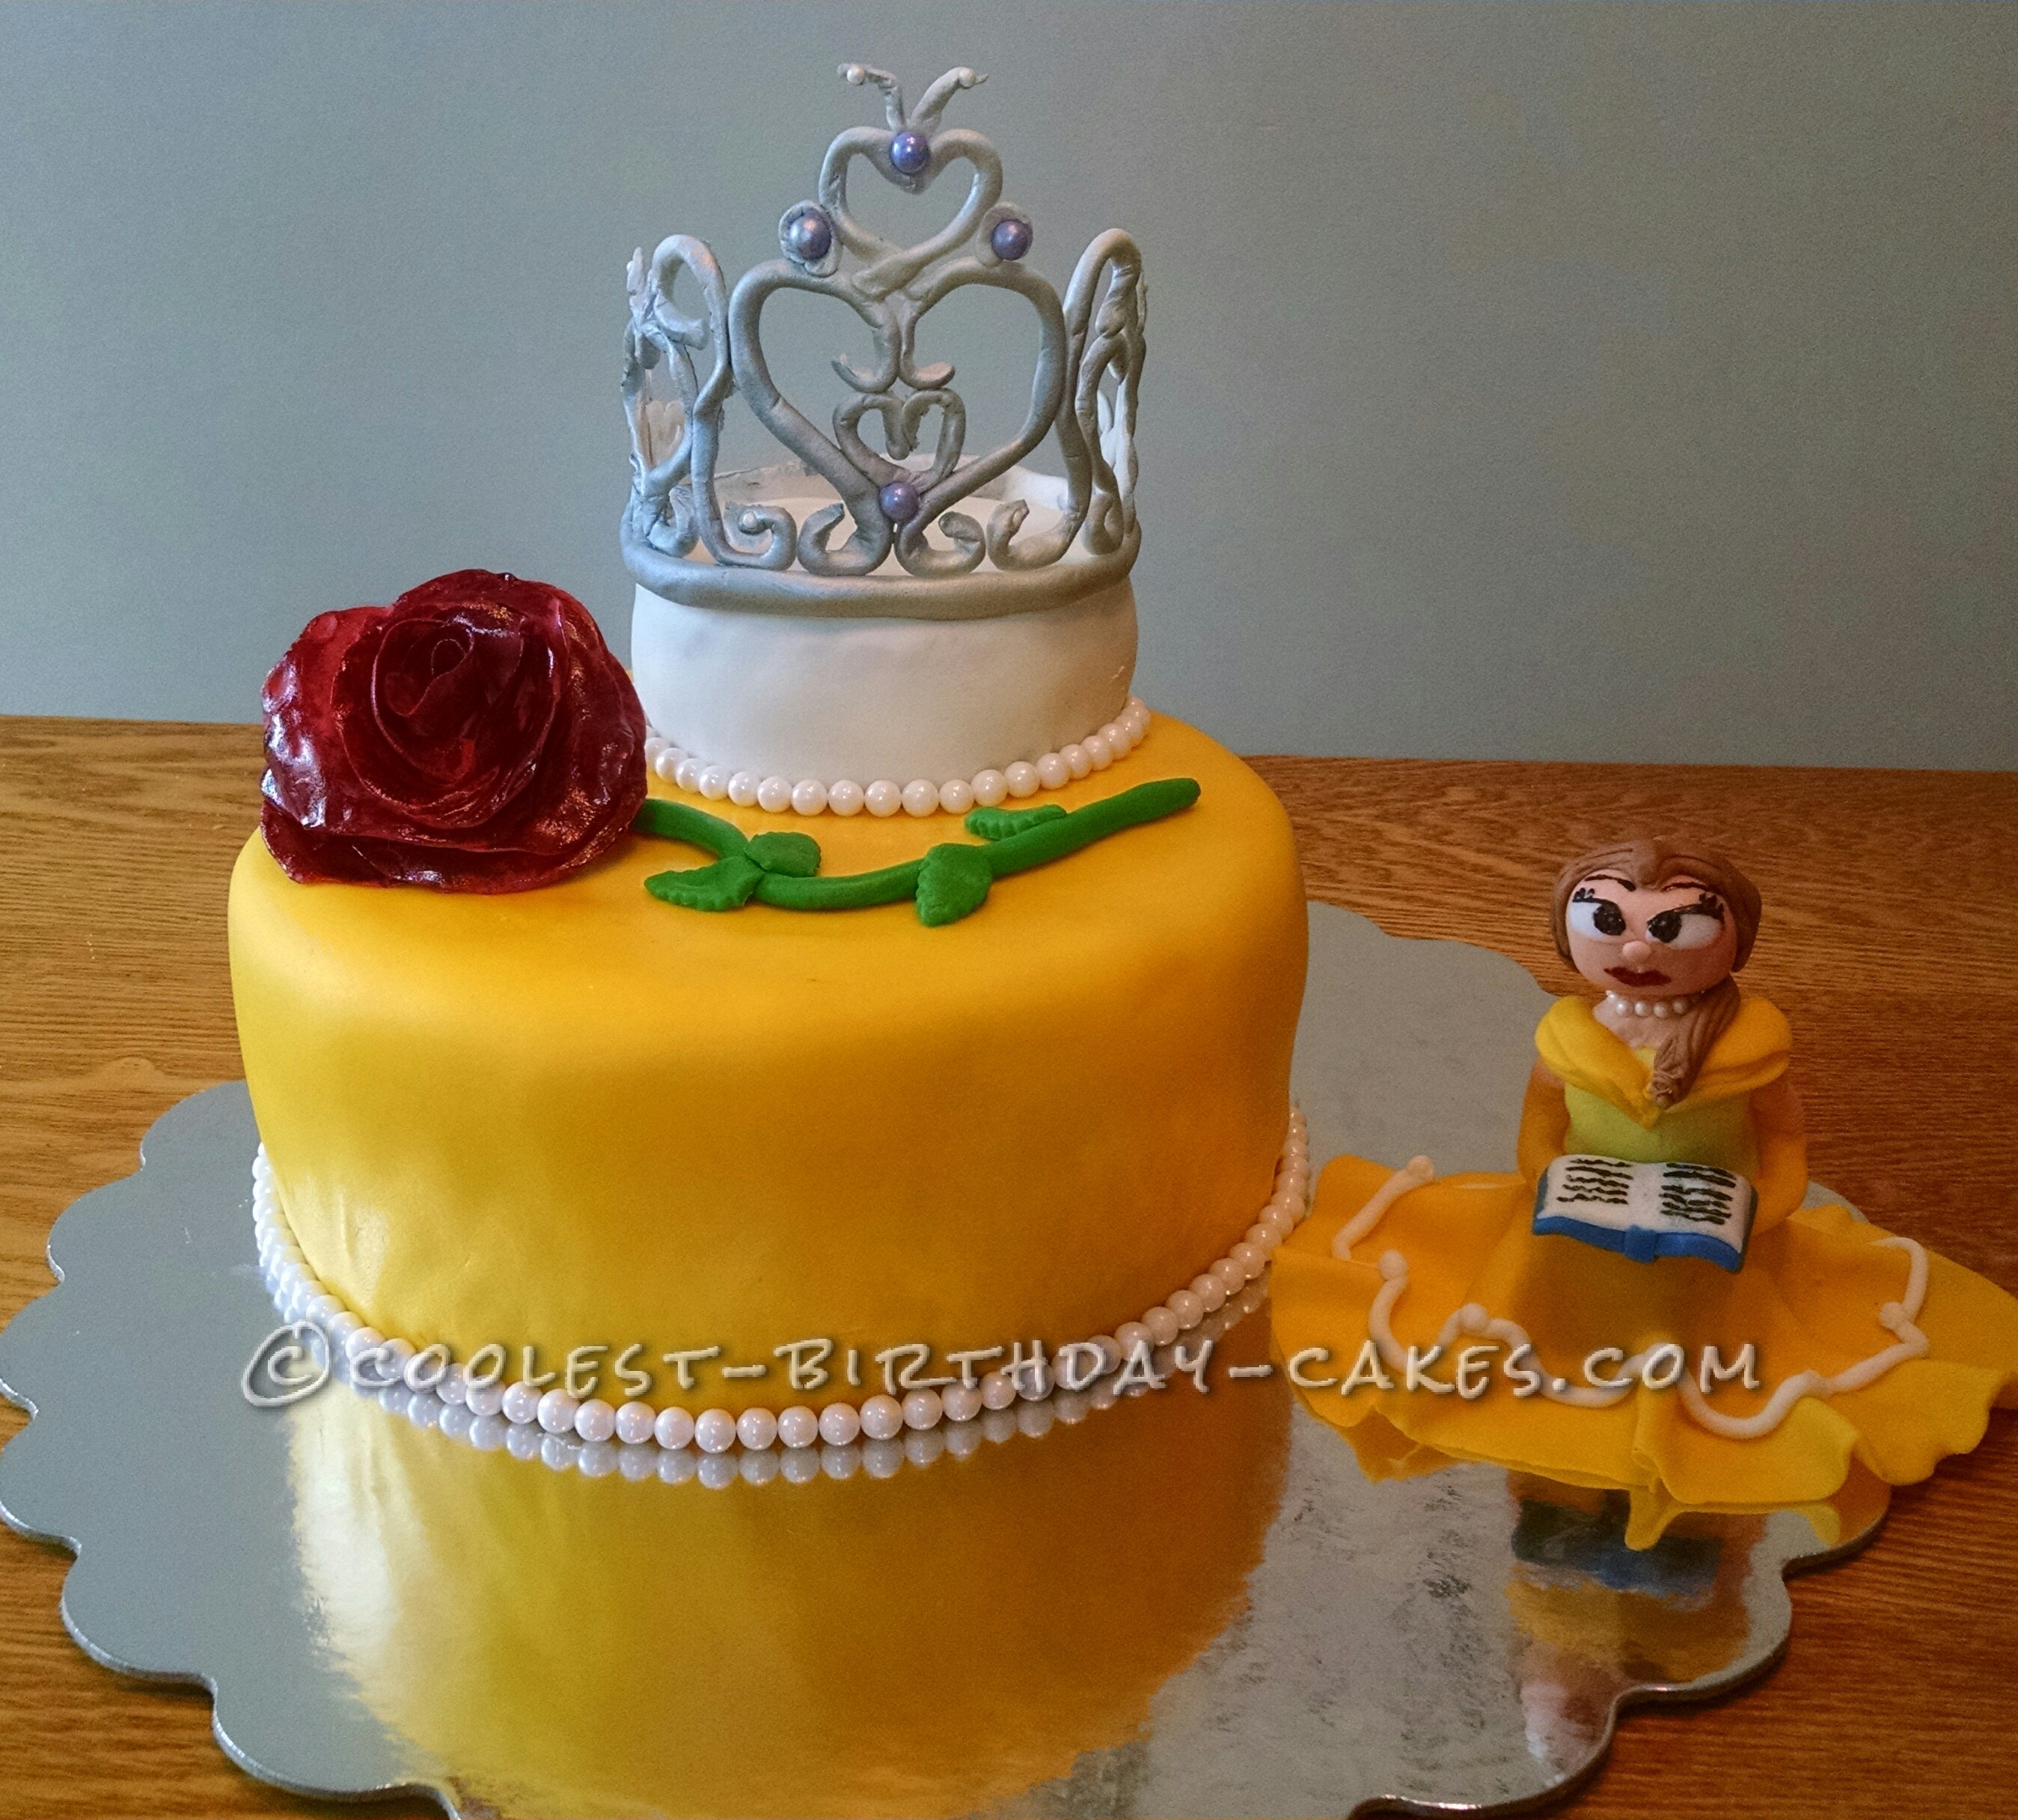 Cool Homemade Beauty and the Beast Cake